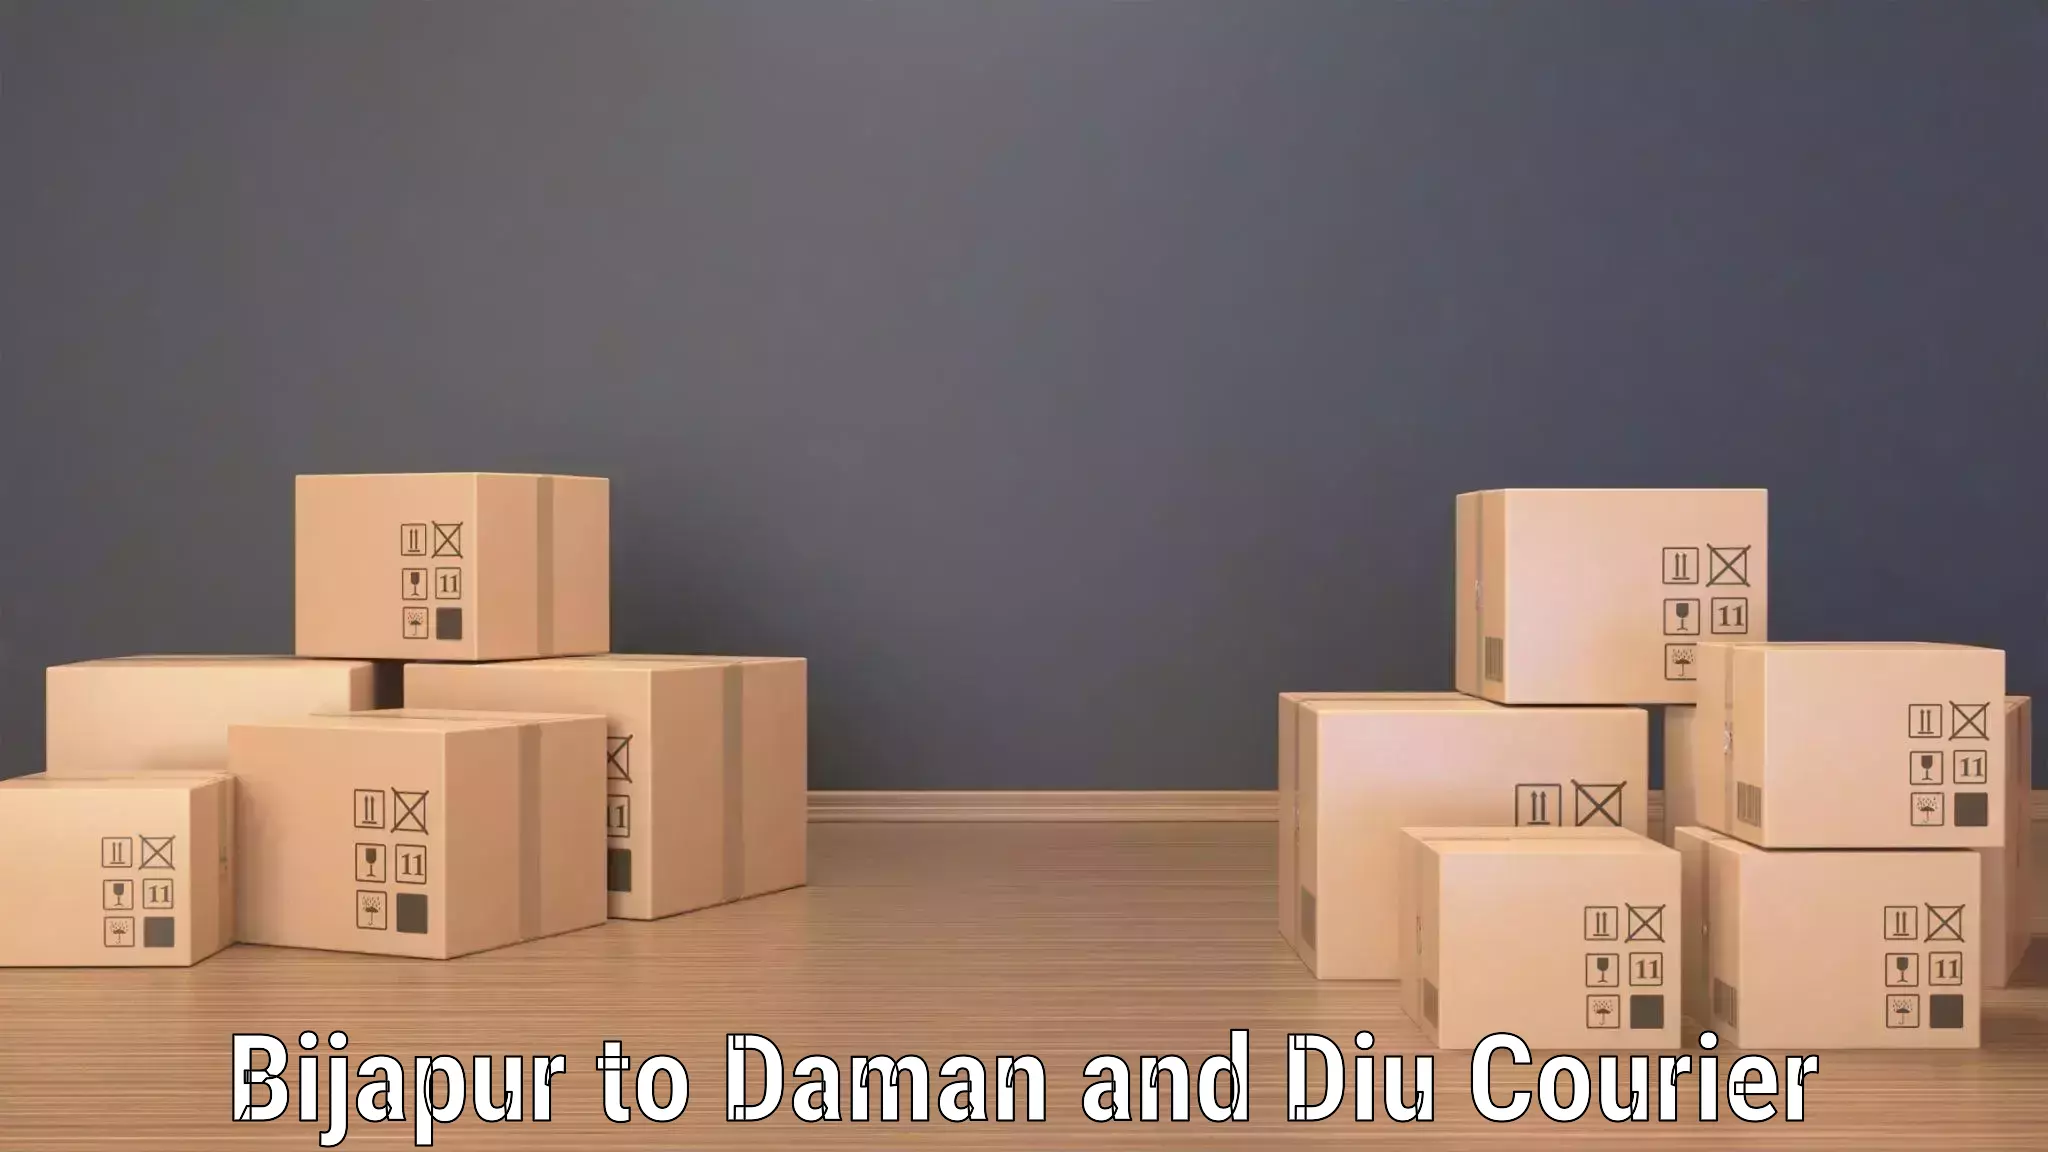 State-of-the-art courier technology Bijapur to Daman